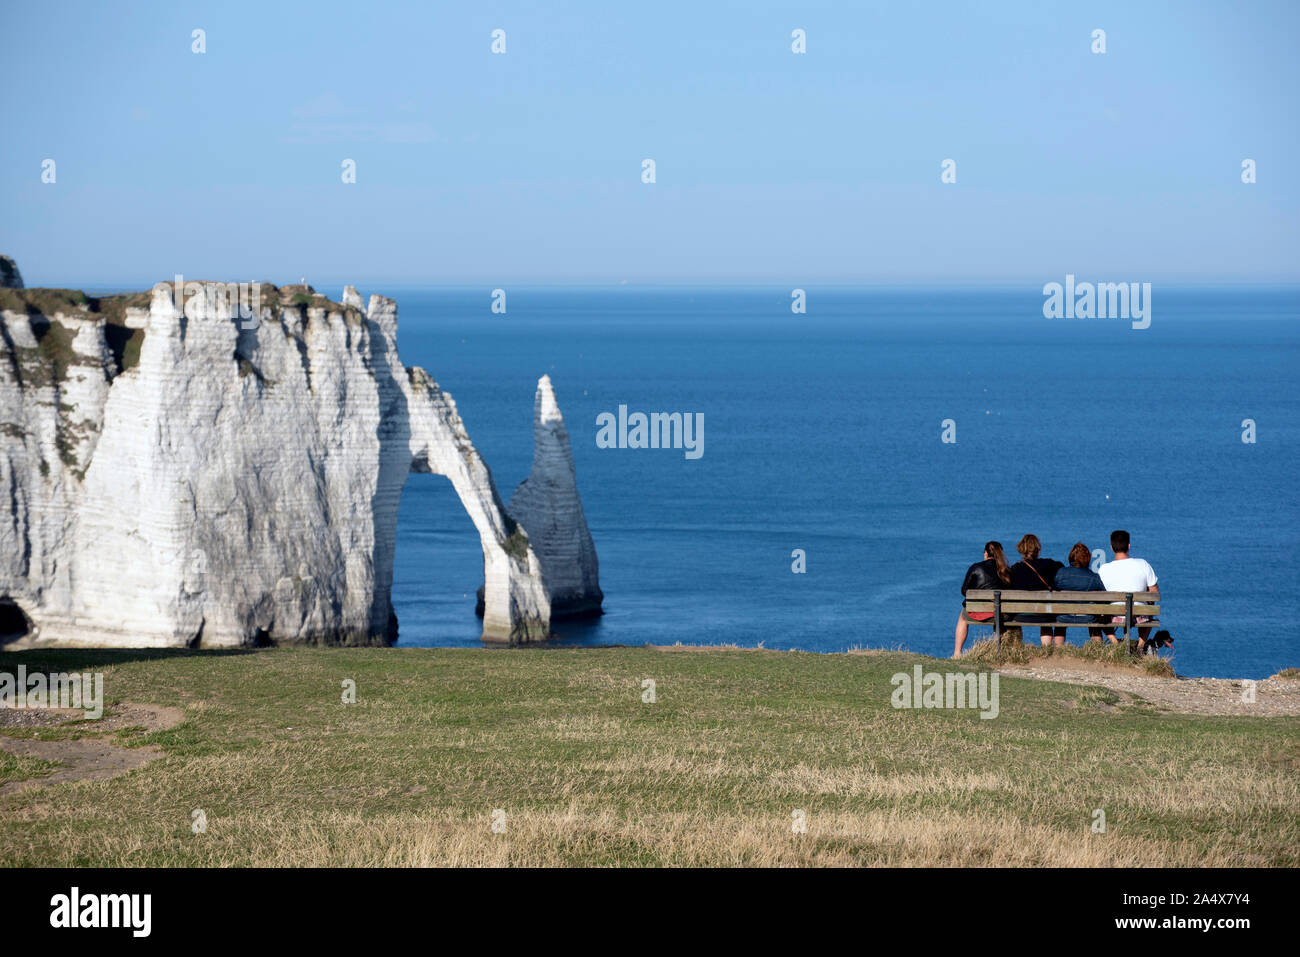 Four people enjoying the views of the Cliffs of Etretat, Normandy, France. Stock Photo